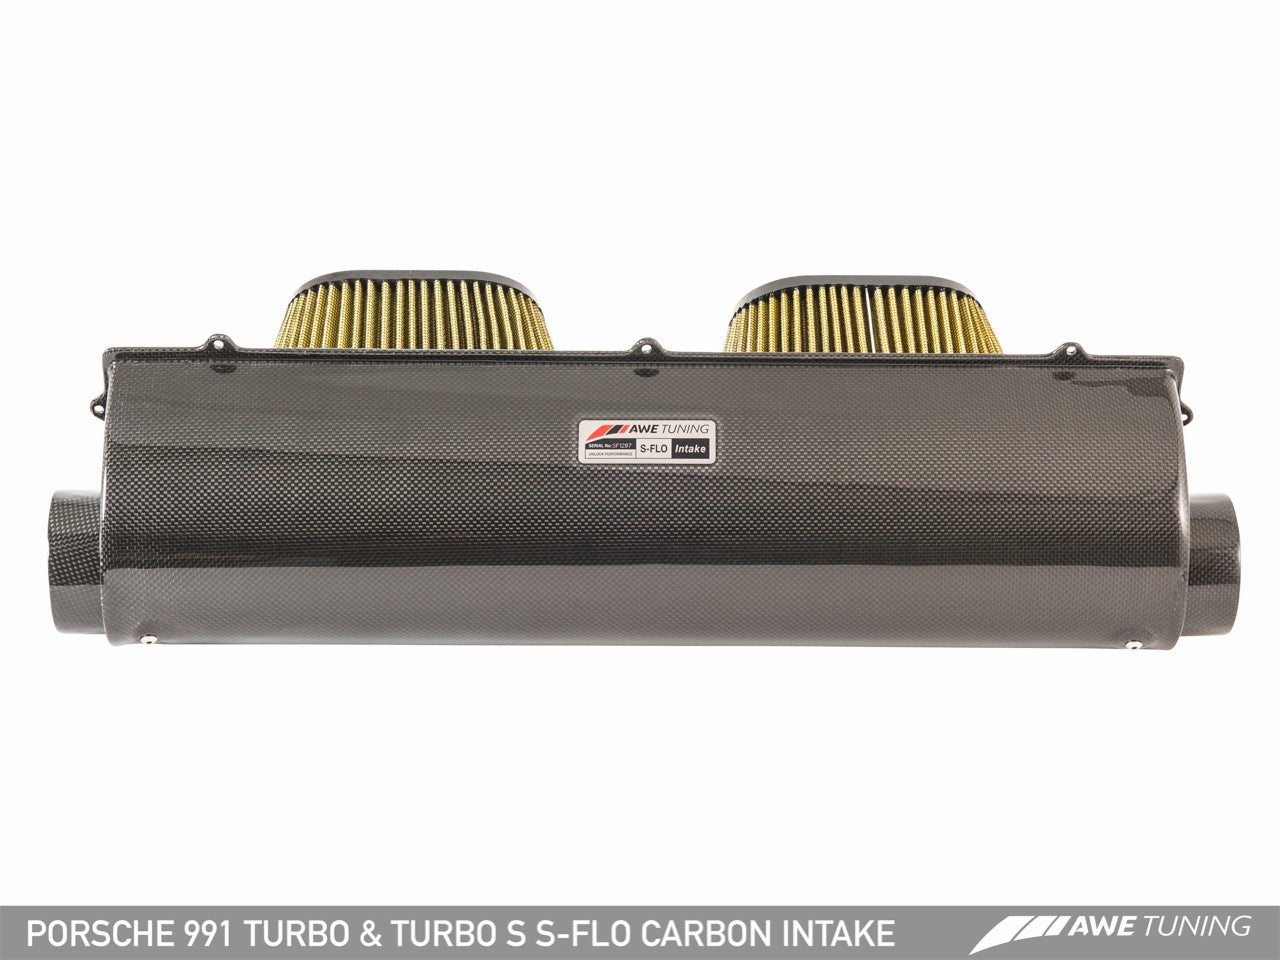 AWE S-FLO Carbon Intake for Porsche 991.1 / 991.2 Turbo and Turbo S